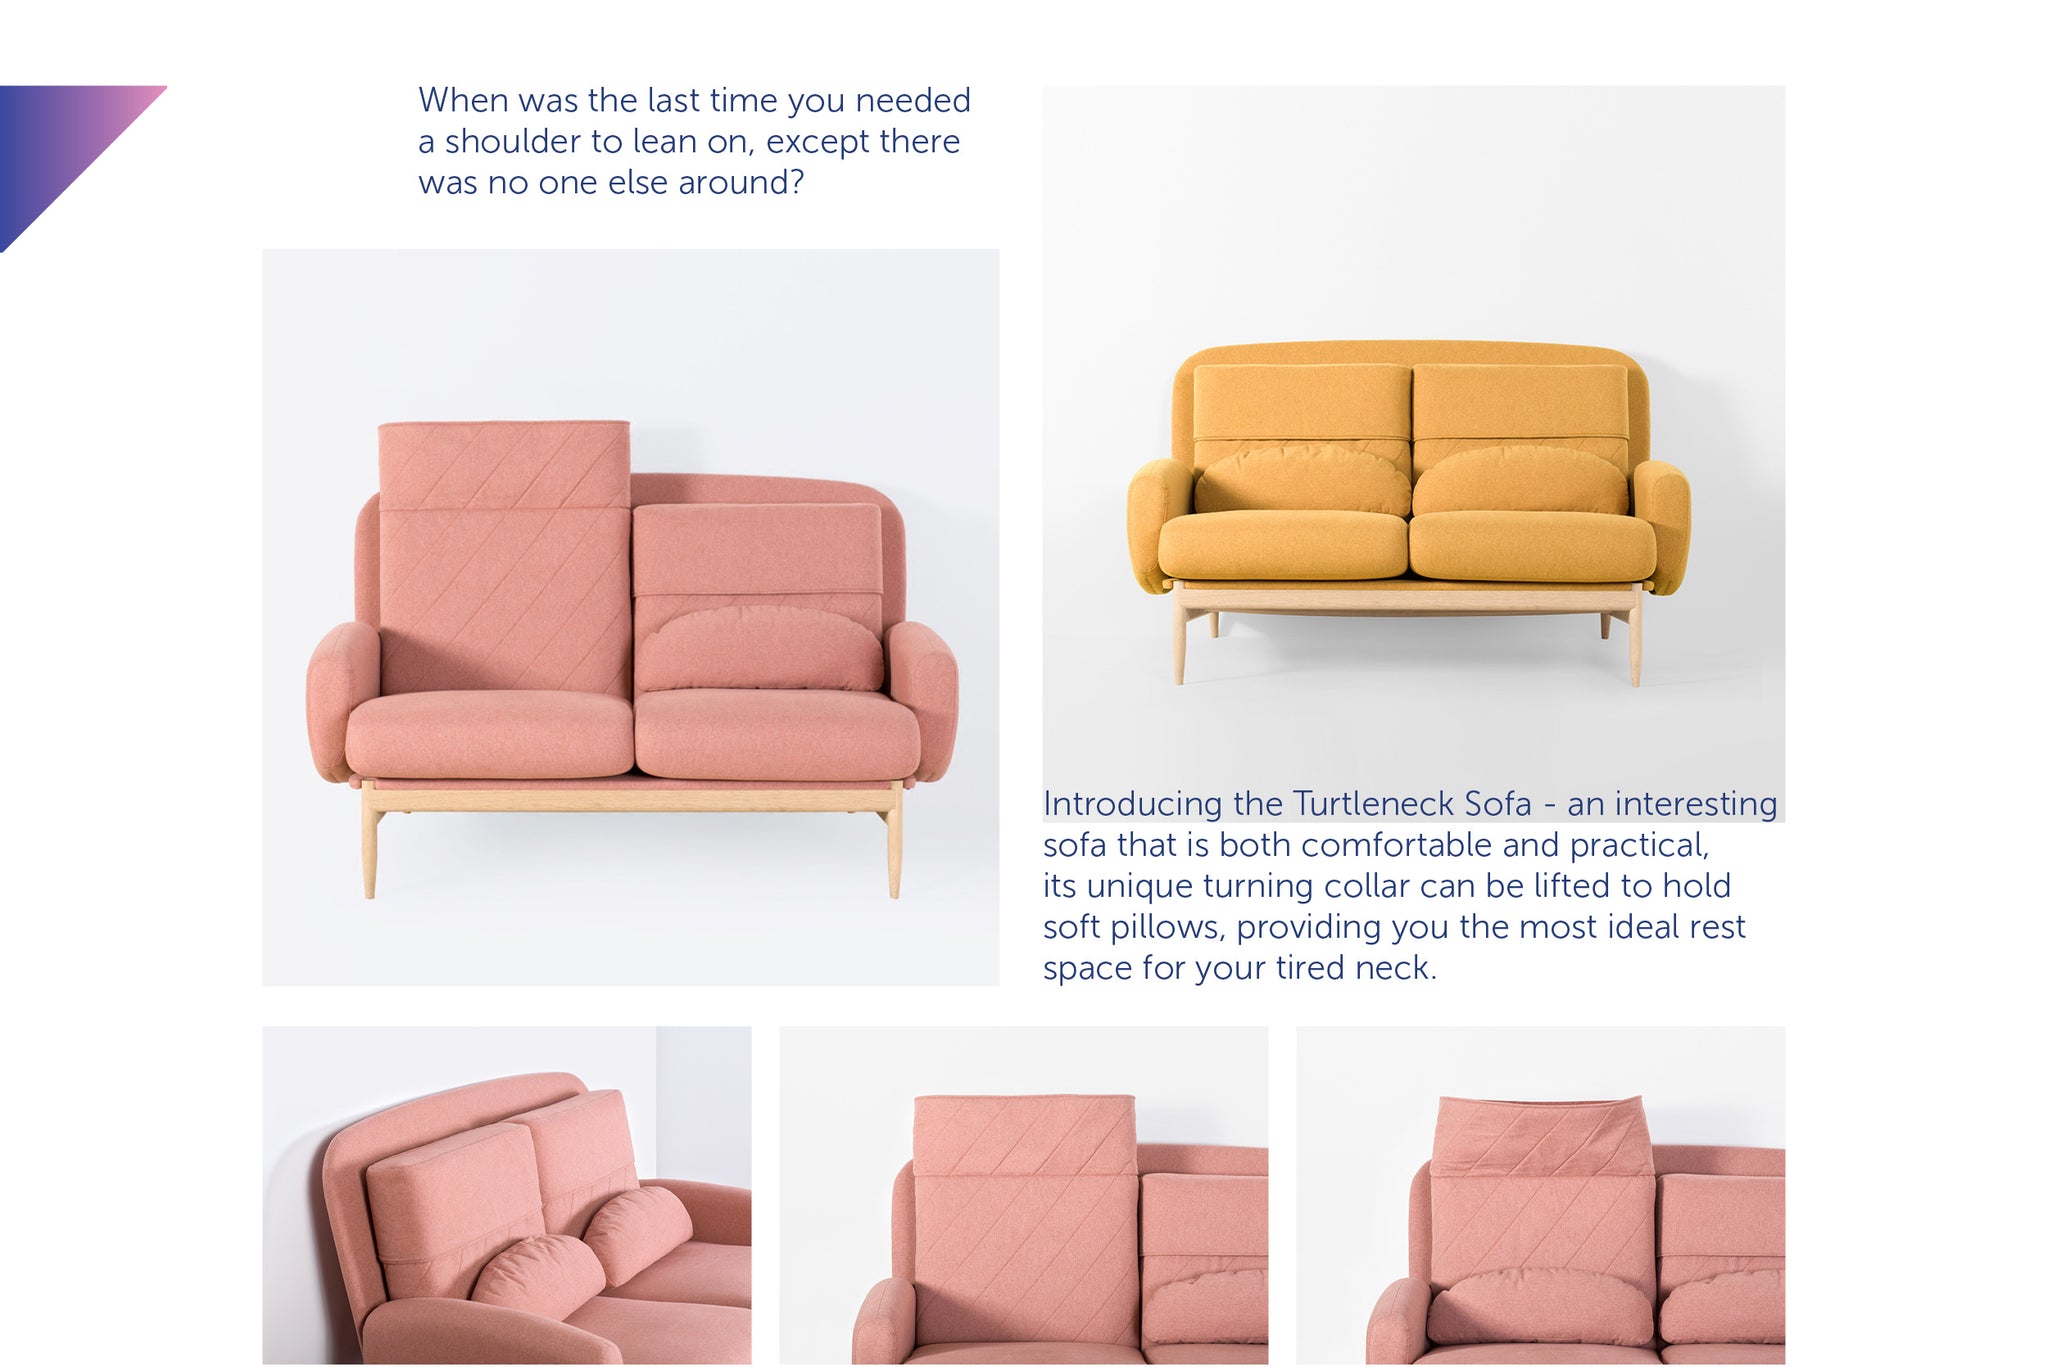 Turtleneck Sofa from Playful Angles Furniture by Ziinlife